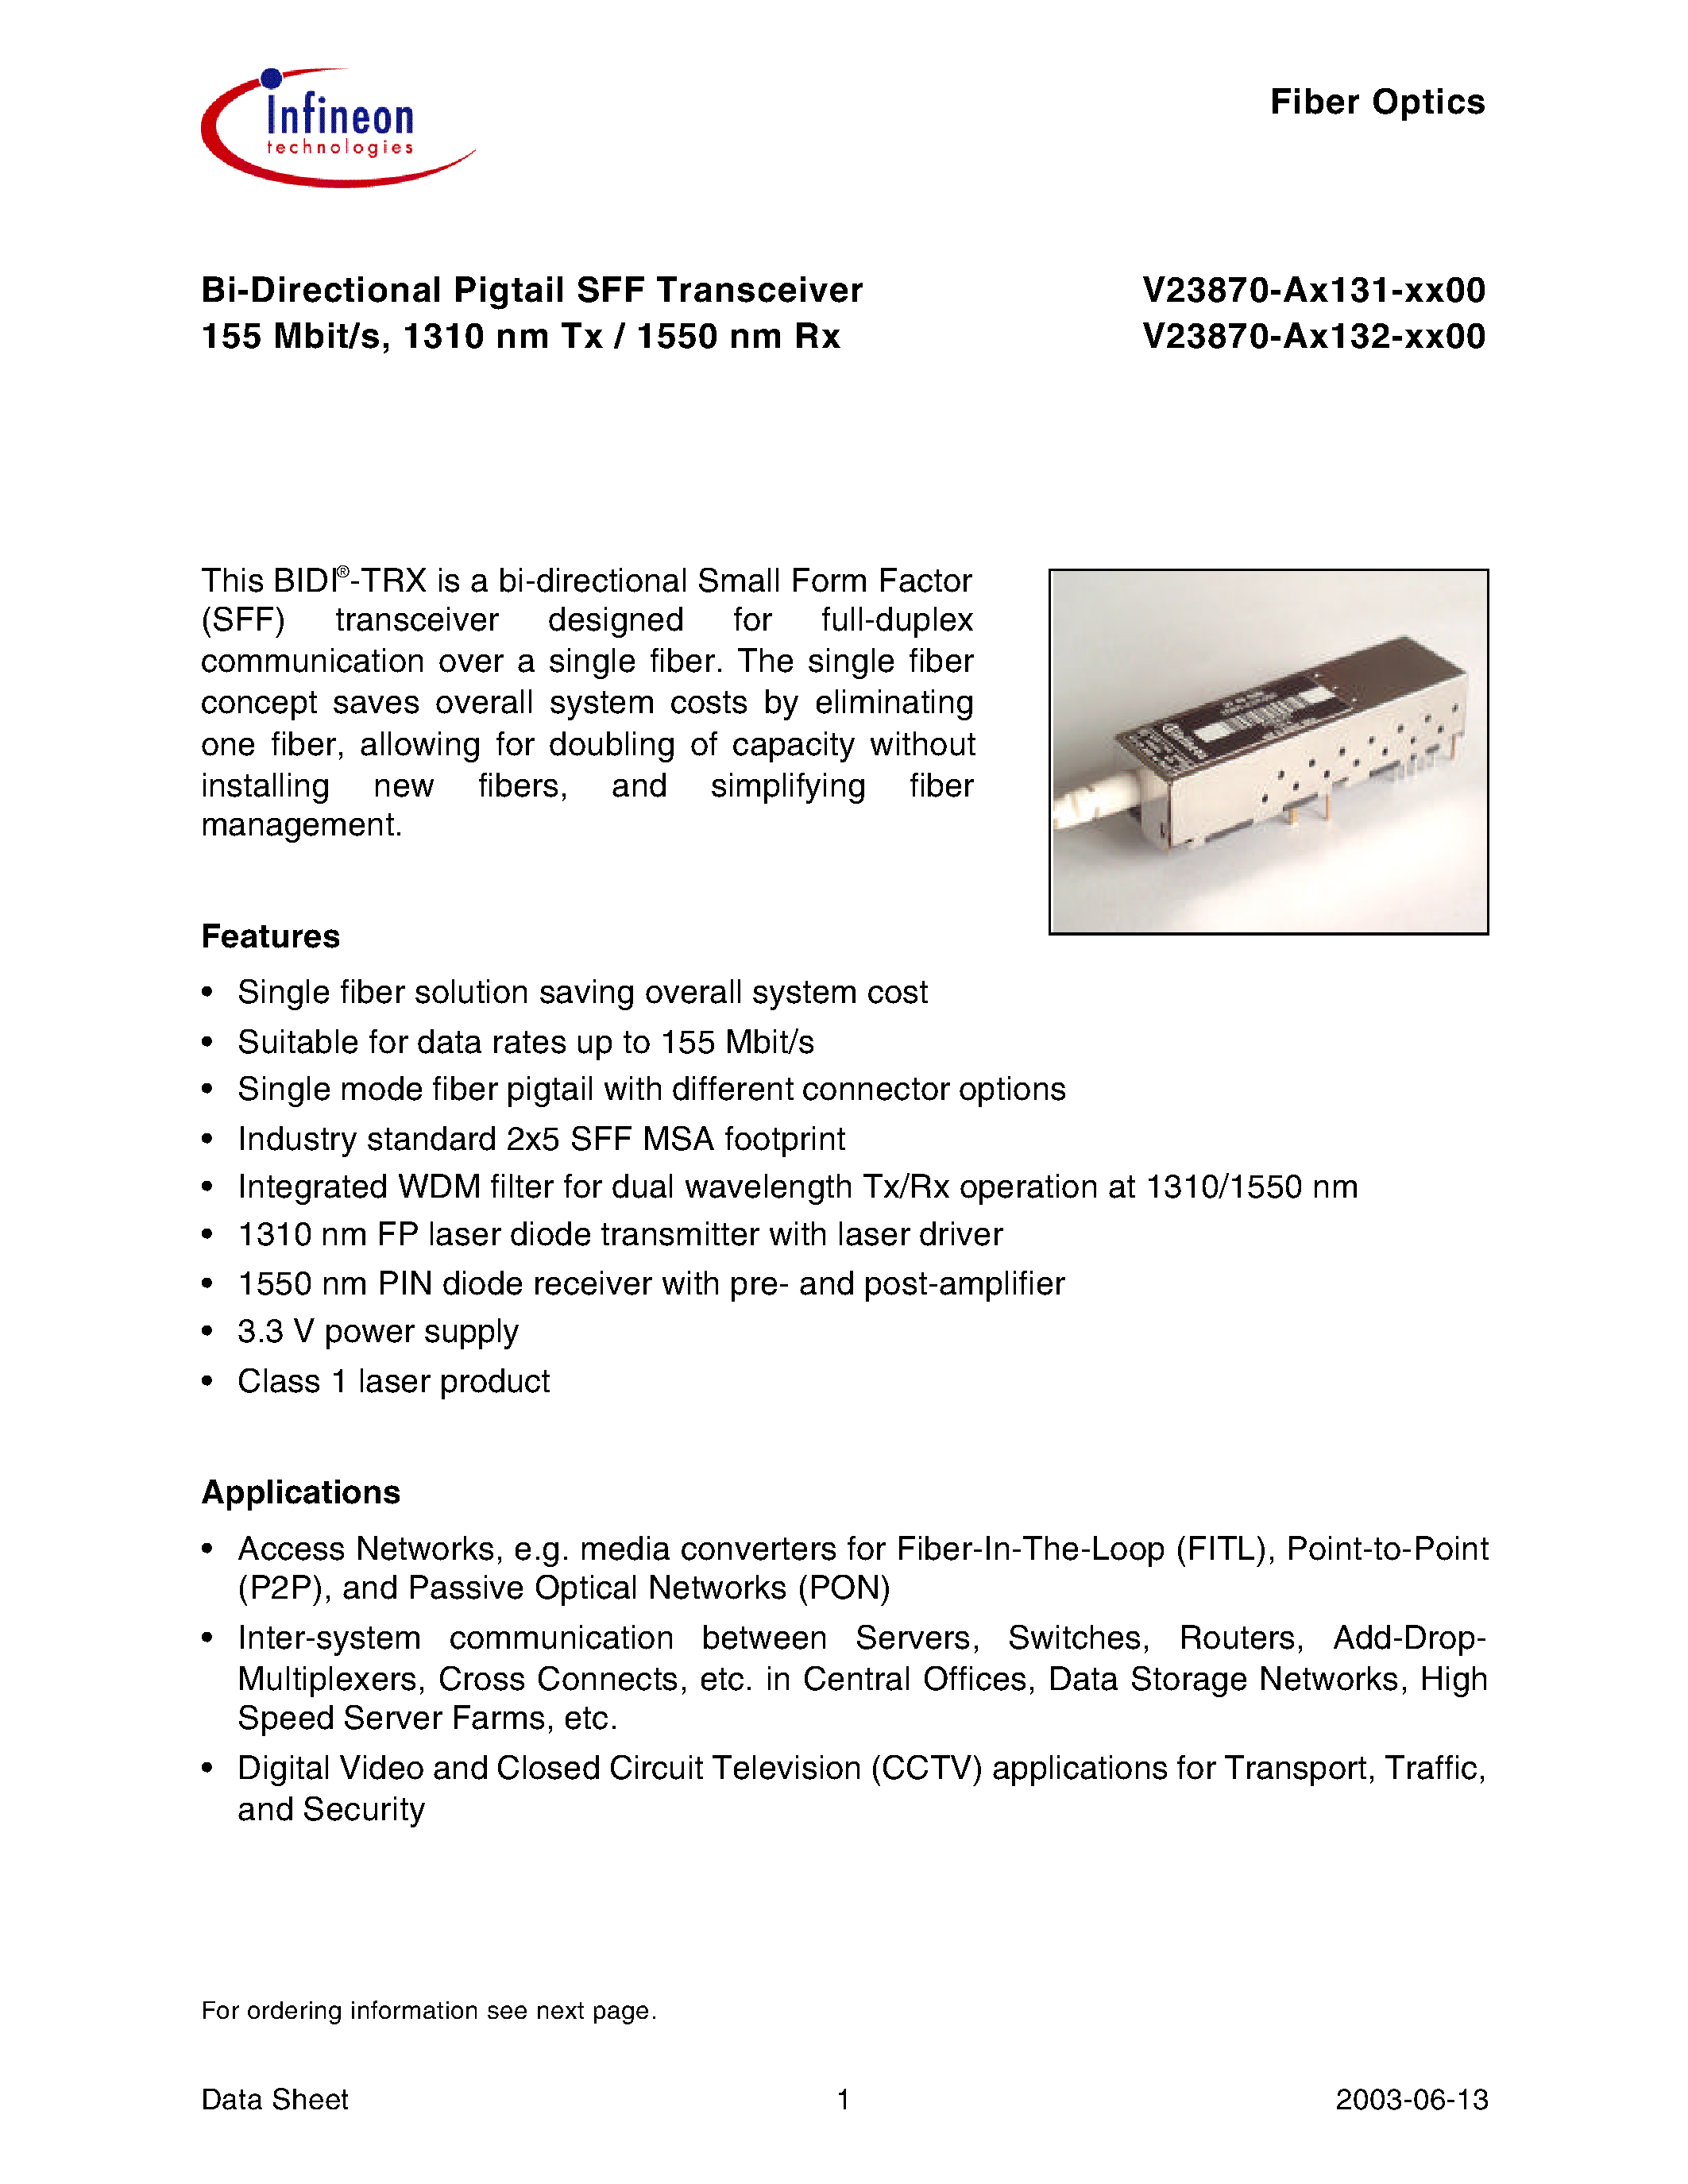 Datasheet V23870-A3131-K600 - Bi-Directional Pigtail SFF Transceiver 155 Mbit/s/ 1310 nm Tx / 1550 nm Rx page 1